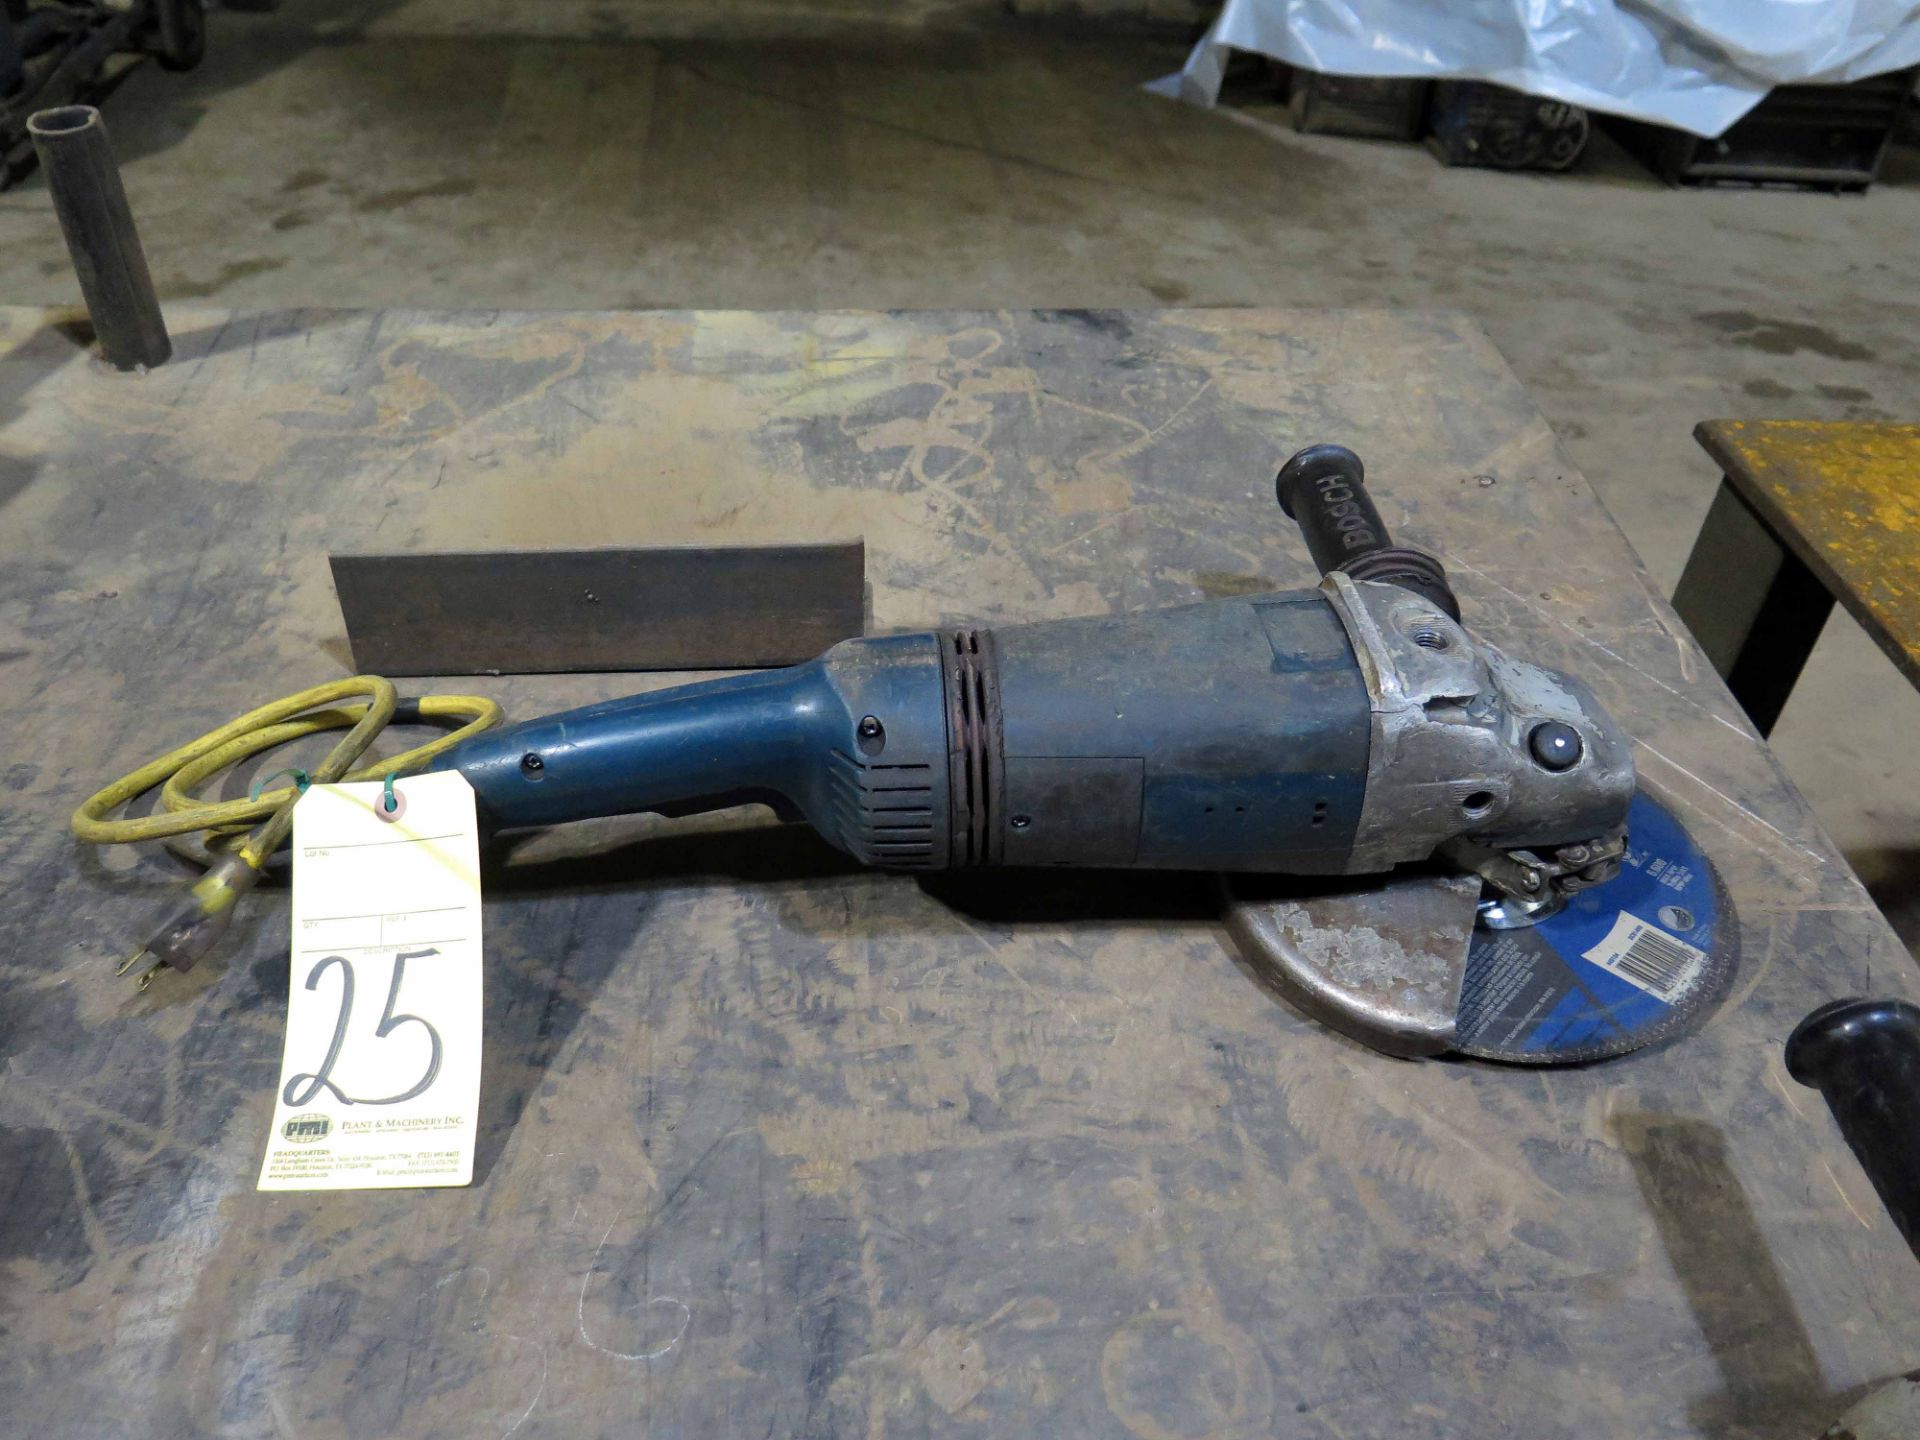 RIGHT ANGLE GRINDER, BOSCH 9"